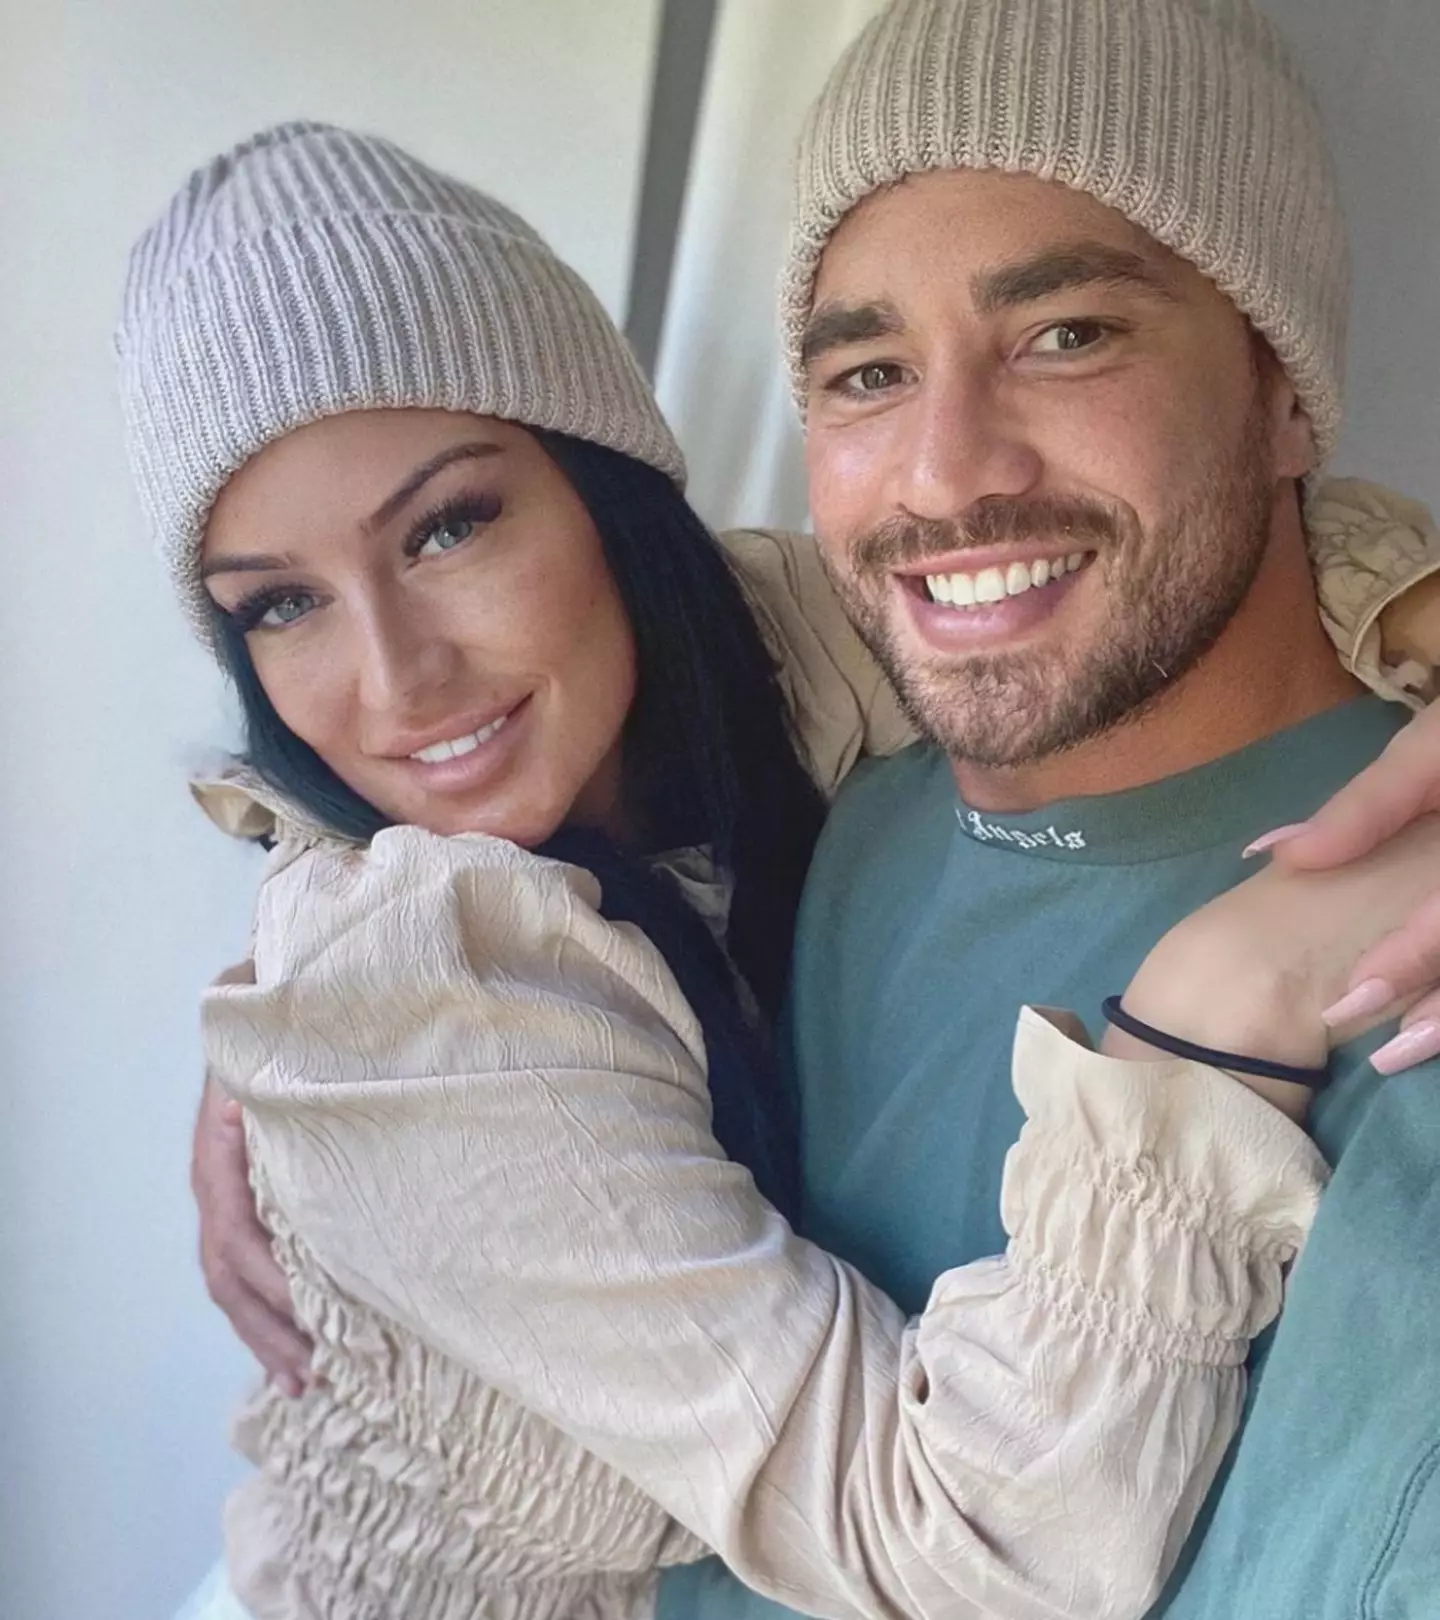 Danny Cipriani has broken his silence on his split from wife of two years, Victoria Rose.